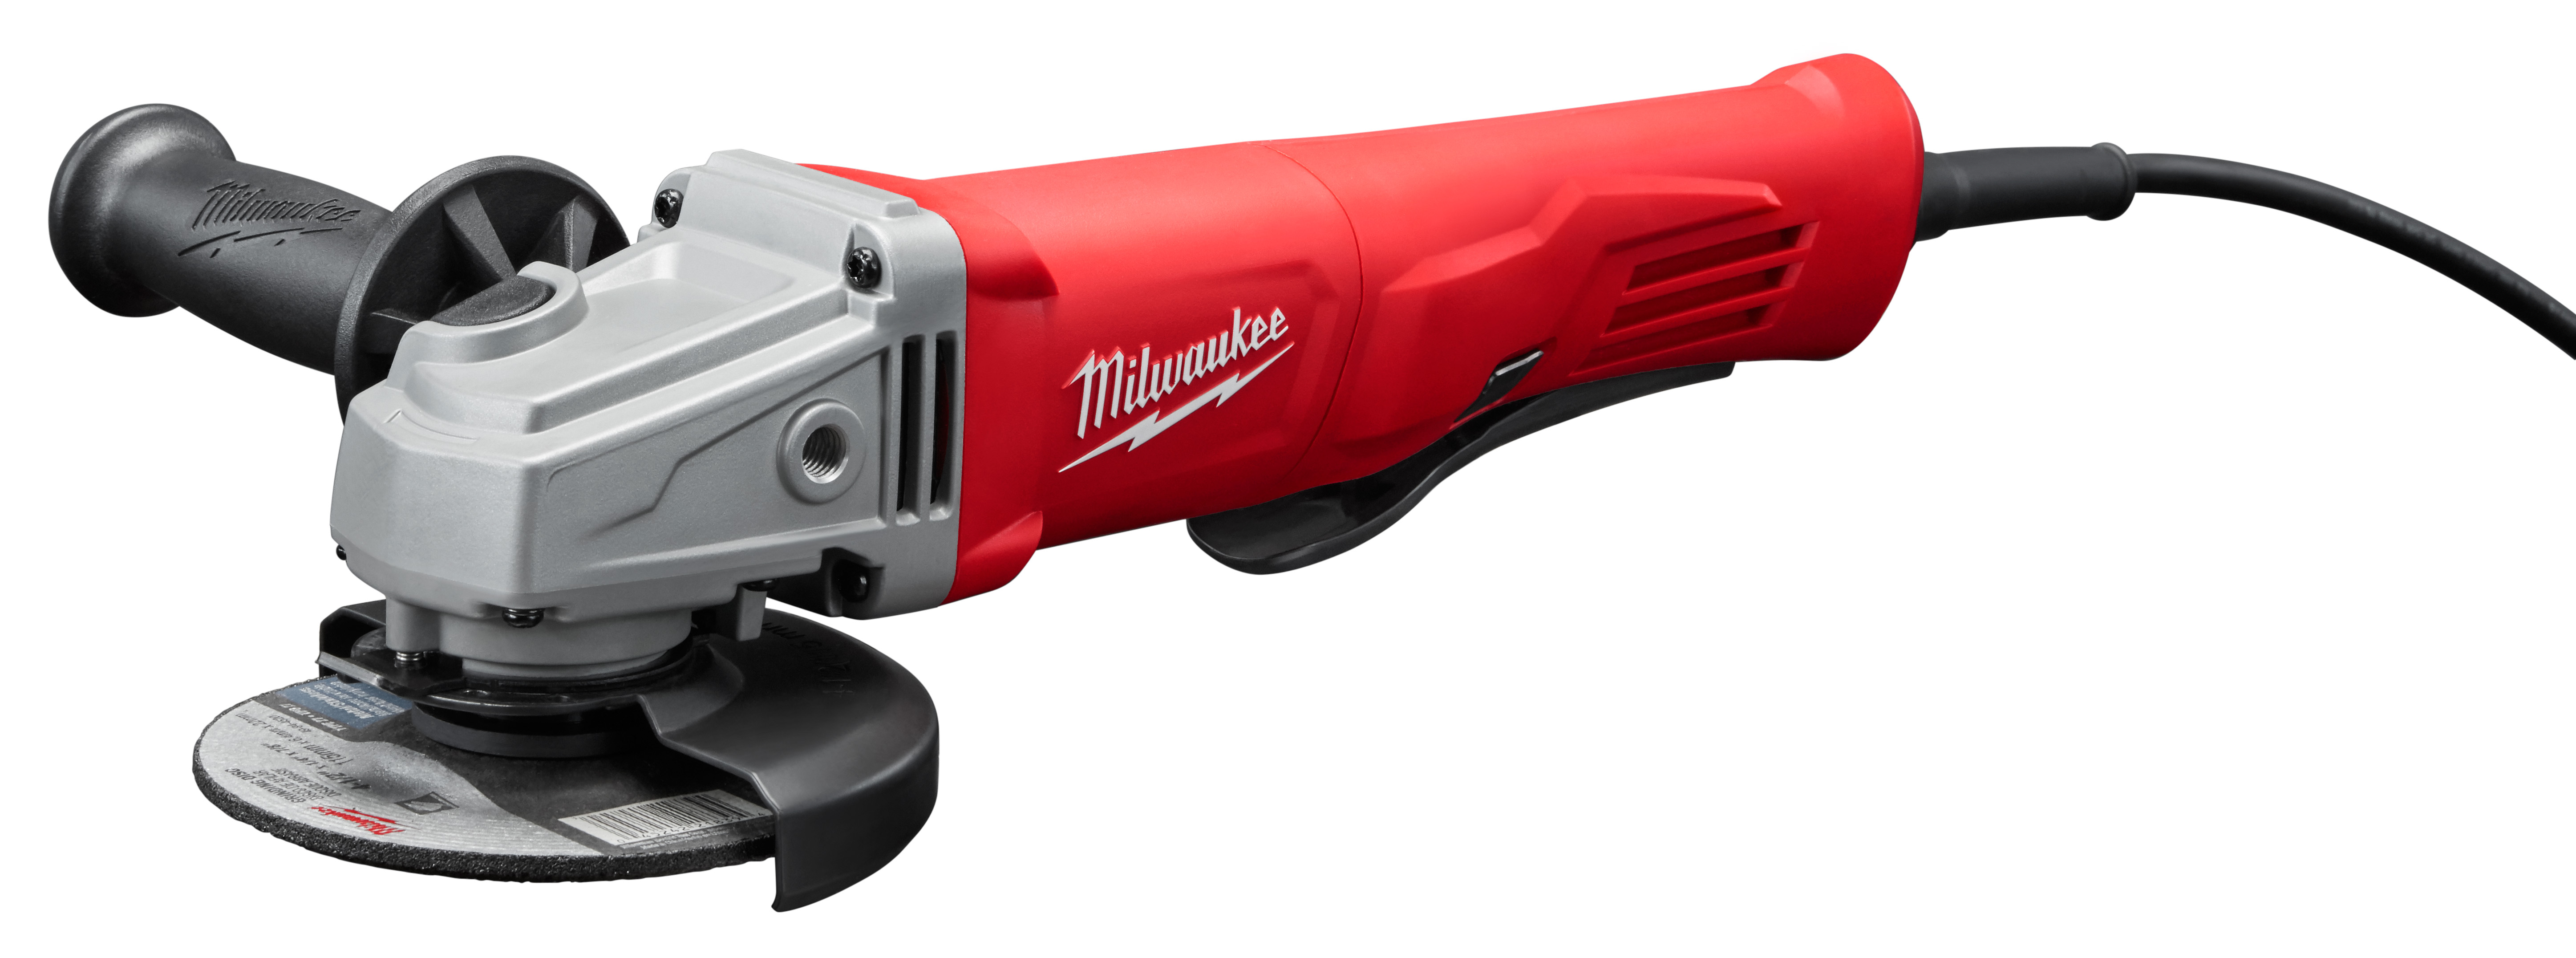 Milwaukee® 6141-30 Lock-On Corded Small Angle Grinder, 4-1/2 in Dia Wheel, 5/8-11 Arbor/Shank, 120 VAC, Black/Gray/Red